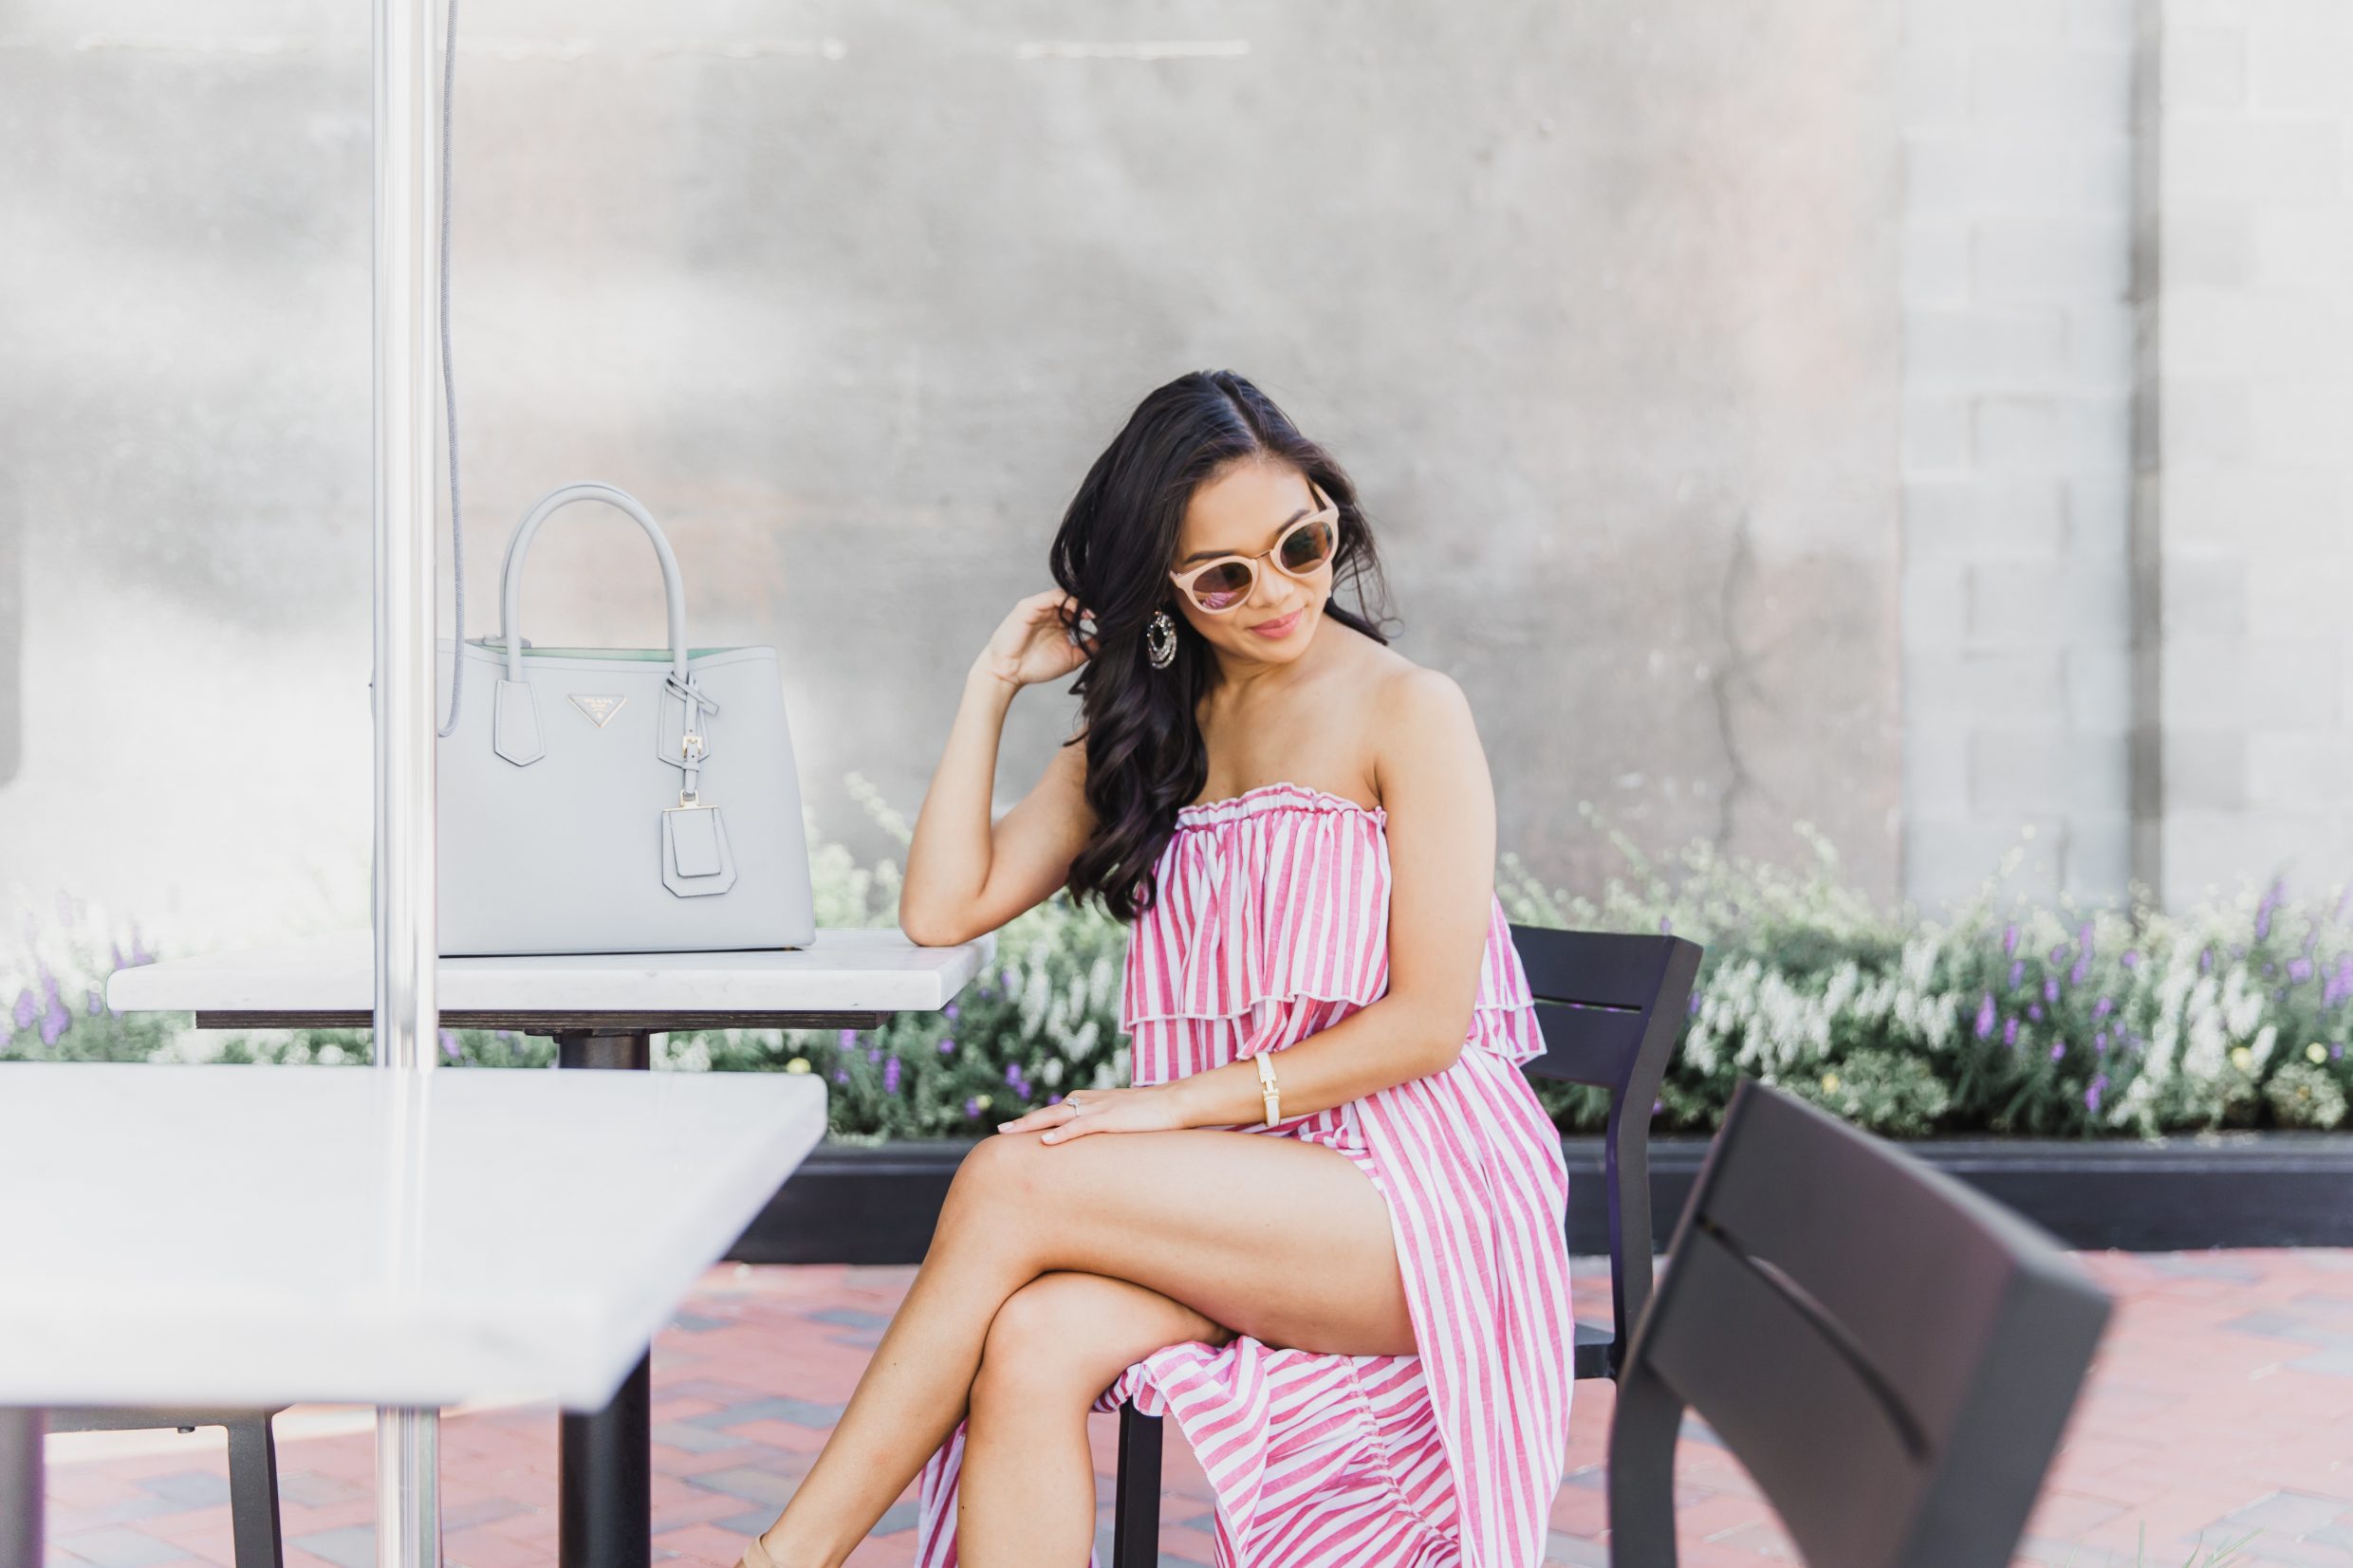 Endless Summer :: Striped Two-Piece Set - Color & Chic